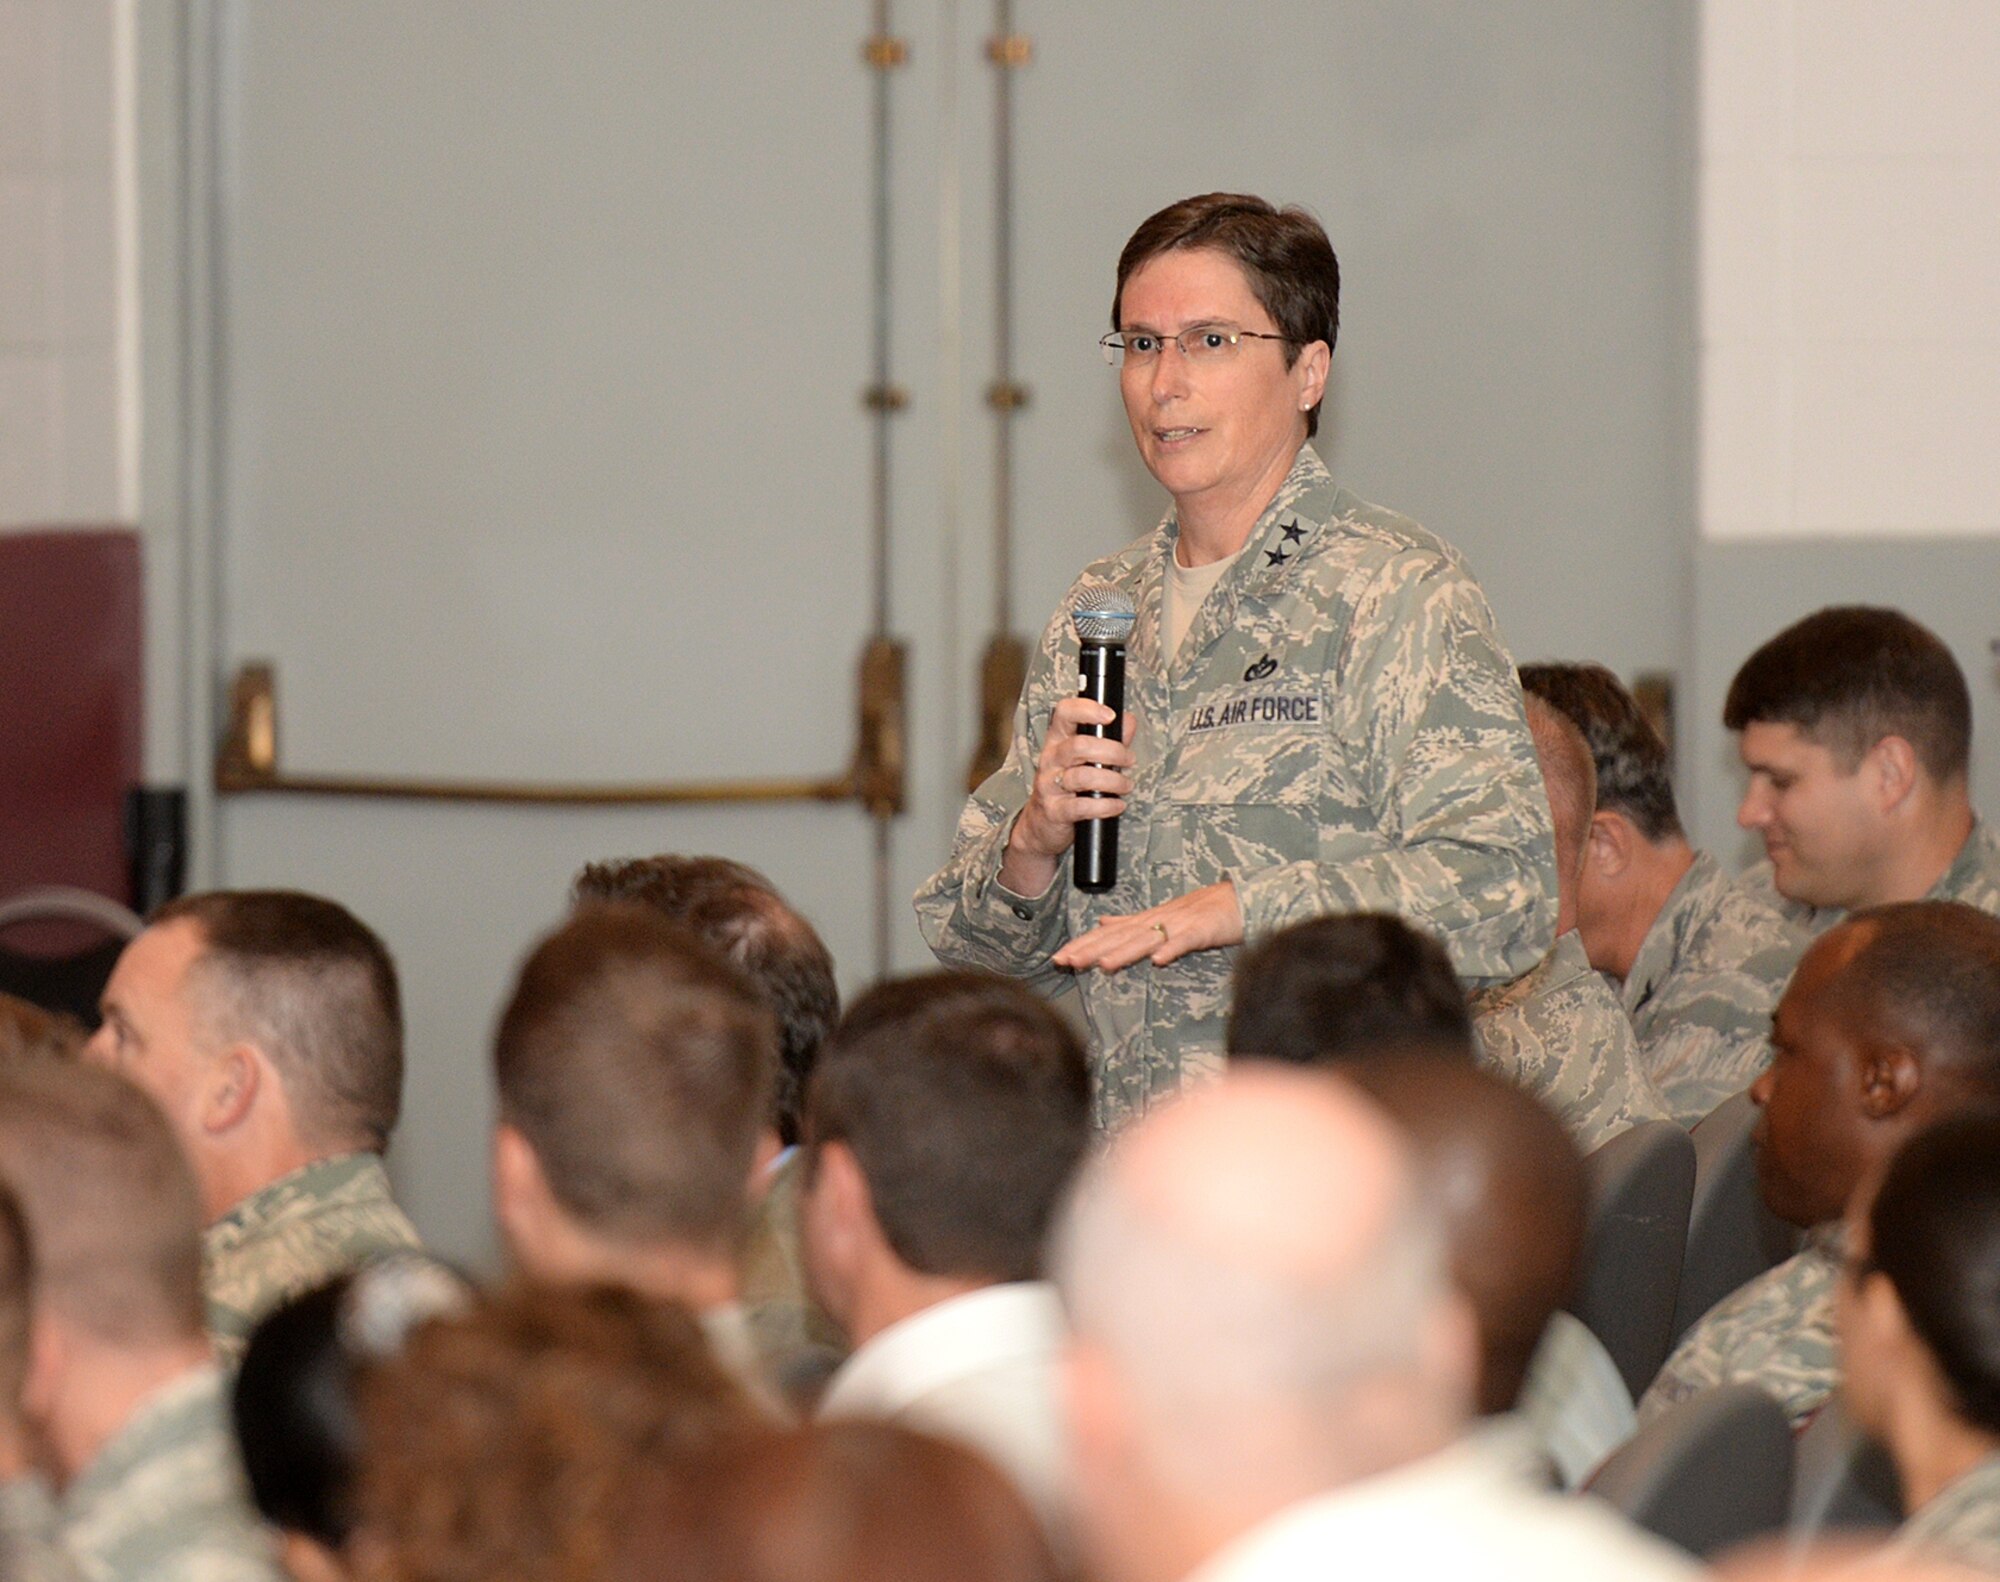 Maj. Gen. Theresa Carter, commander of the Air Force Installation and Mission Support Center (Provisional), presents information about the new unit to about 400 members of the Air Force Civil Engineer Center, Air Force Security Forces Center, Air Force Materiel Command Services Directorate and local squadrons assigned to the Air Force Installation Contracting Agency Oct. 9 at a town hall meeting in the Bob Hope Theater at Joint Base San Antonio-Lackland, Tex. (U.S. Air Force photo/Benjamin Faske)